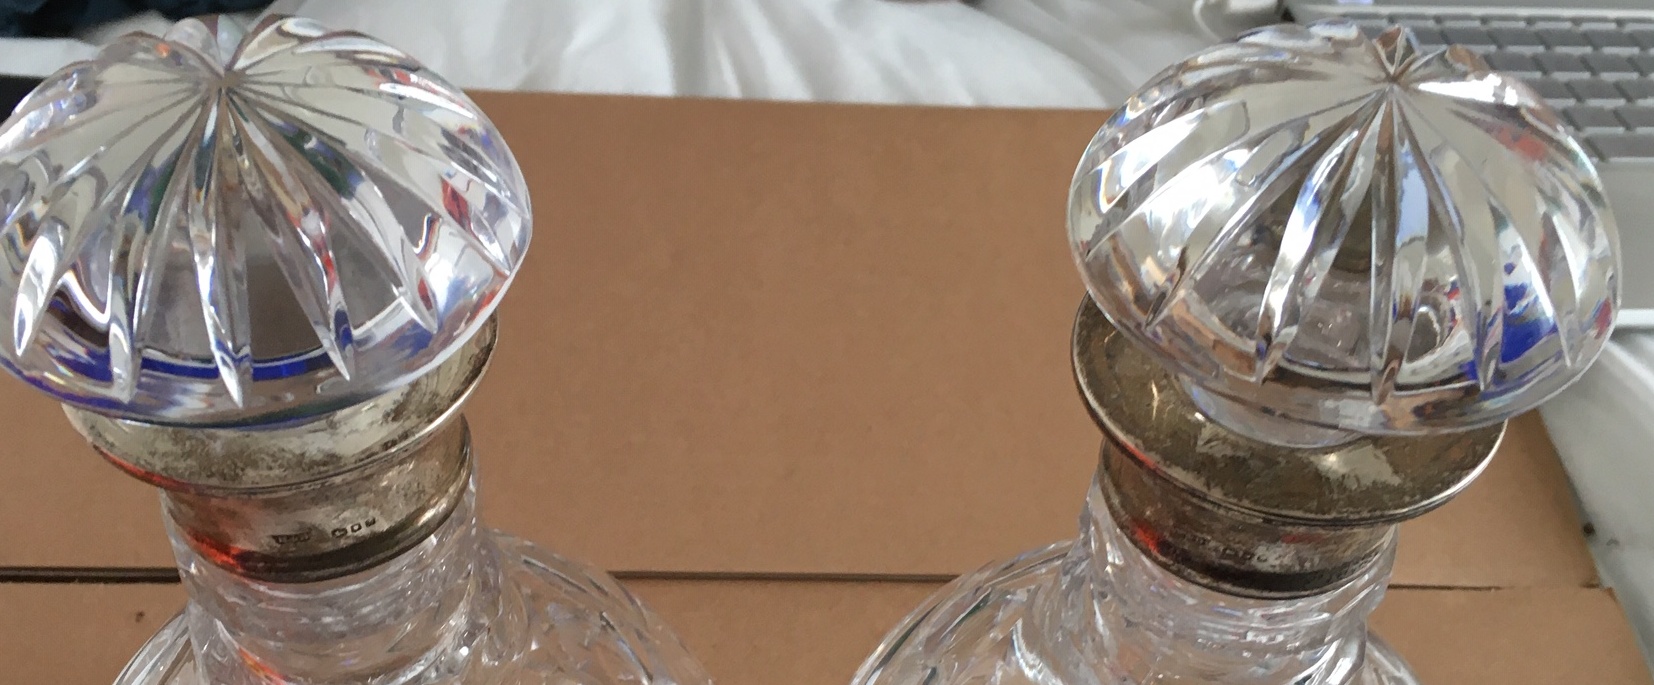 Pair of Vintage Silver Collared Crystal Decanter 9 3/4" tall and 5 1/2" at the widest. - Image 7 of 7